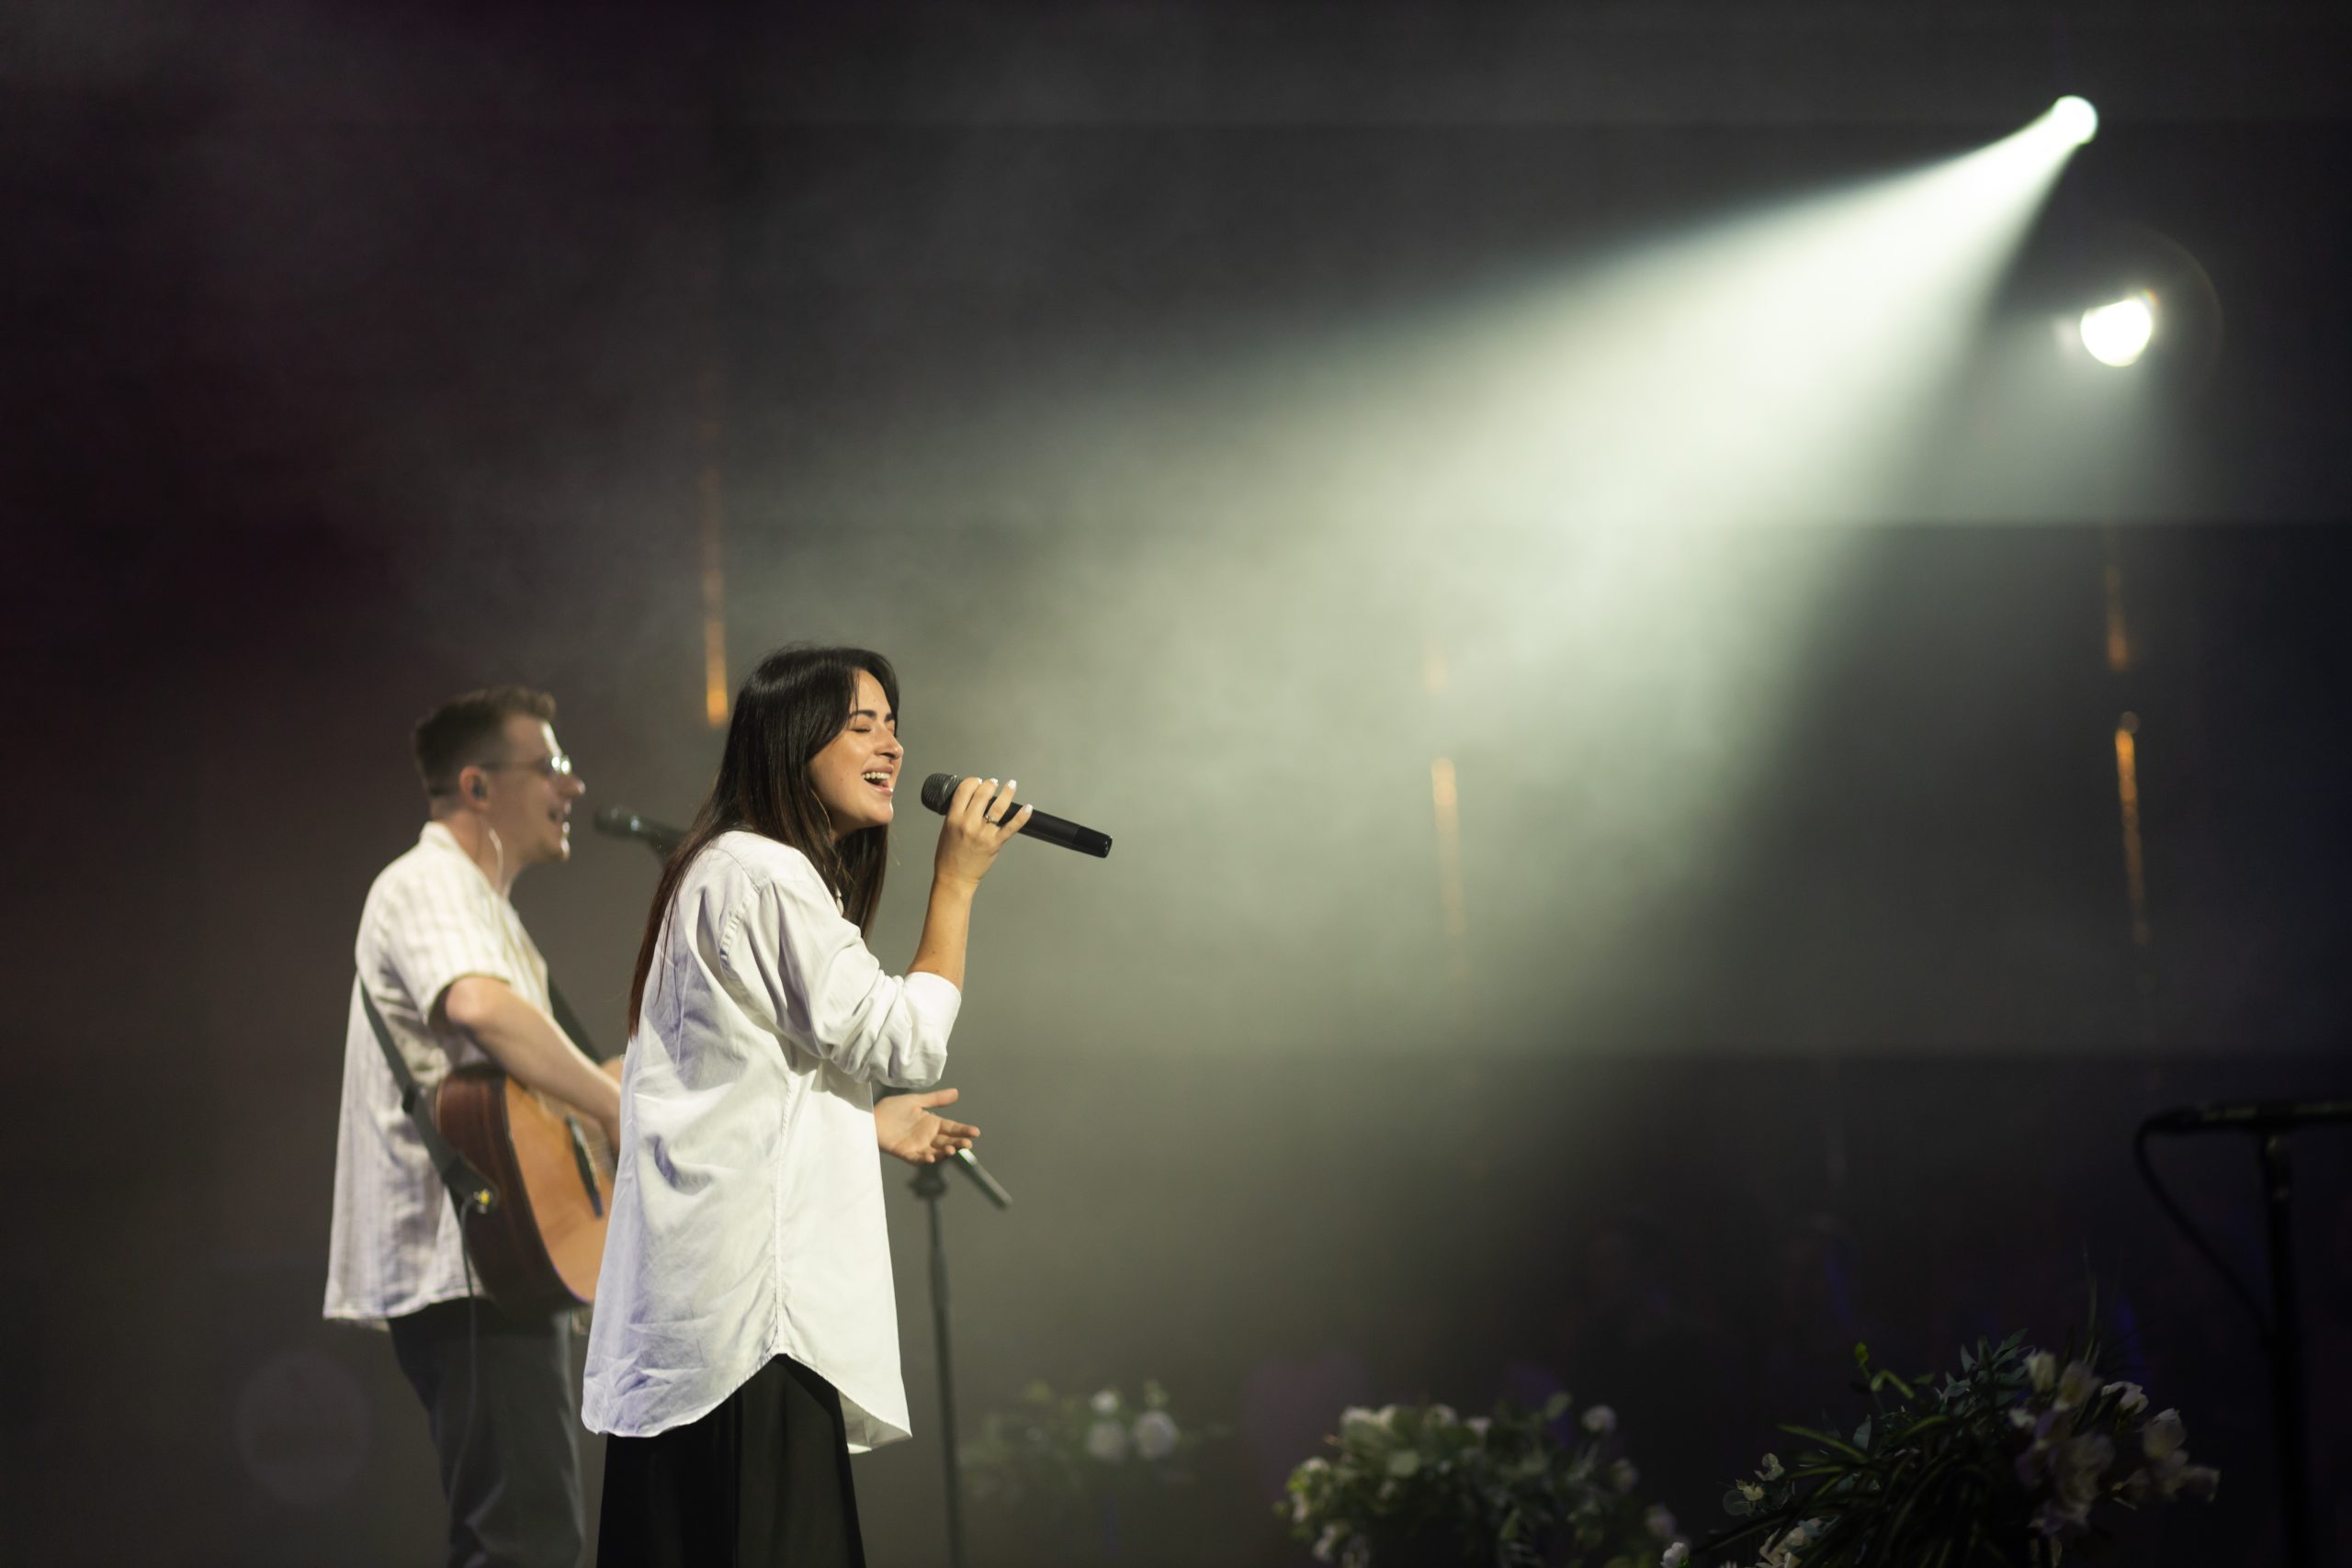 Worship band sings on stage in church under spotlight, live streamed using high speed internet provided by Kinetic Business